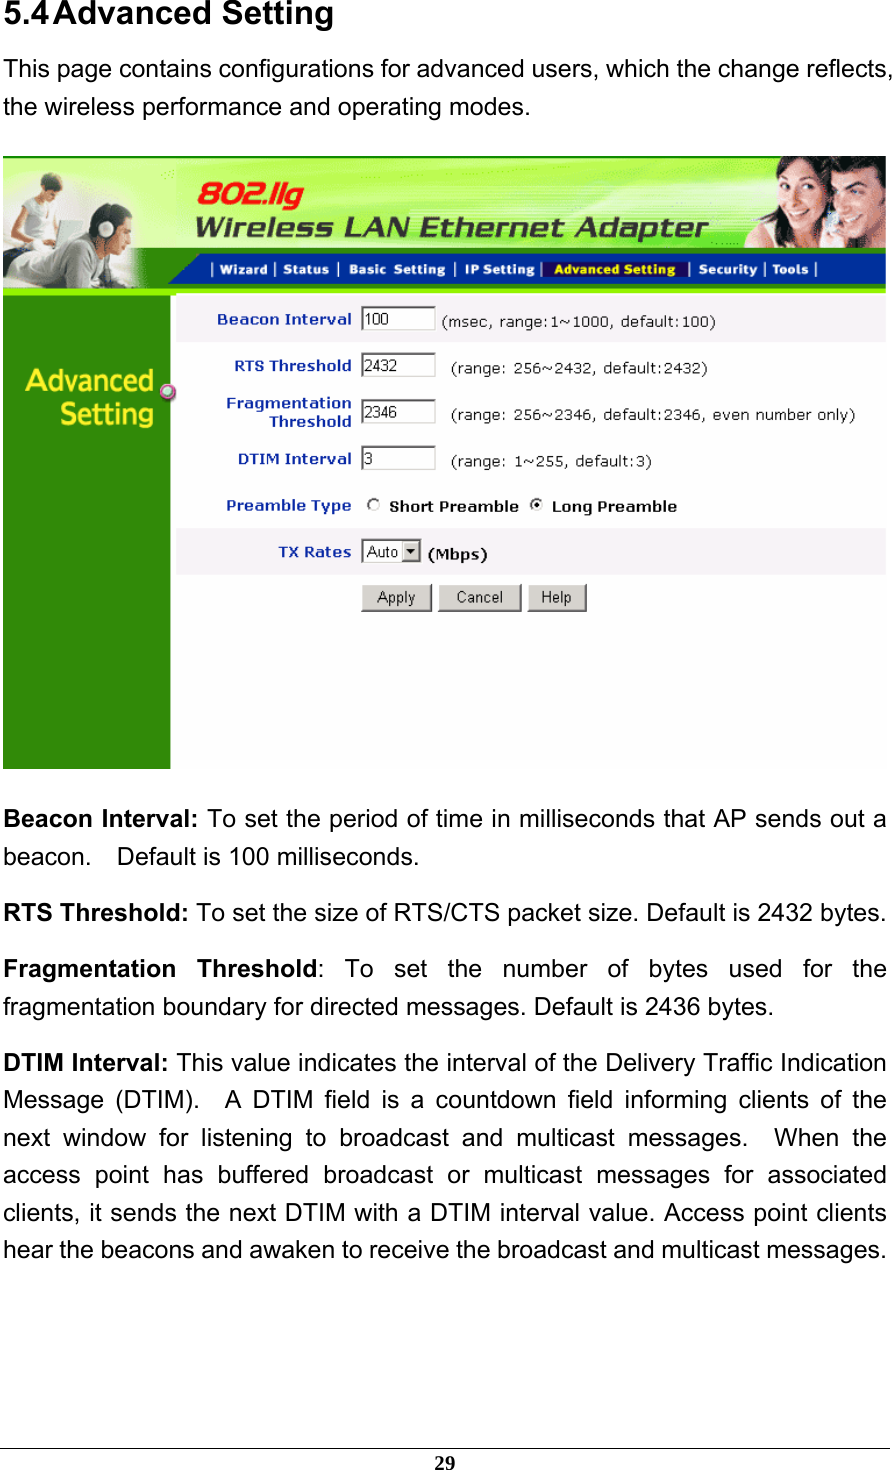 5.4 Advanced  Setting This page contains configurations for advanced users, which the change reflects, the wireless performance and operating modes.  Beacon Interval: To set the period of time in milliseconds that AP sends out a beacon.    Default is 100 milliseconds. RTS Threshold: To set the size of RTS/CTS packet size. Default is 2432 bytes. Fragmentation Threshold: To set the number of bytes used for the fragmentation boundary for directed messages. Default is 2436 bytes. DTIM Interval: This value indicates the interval of the Delivery Traffic Indication Message (DTIM).  A DTIM field is a countdown field informing clients of the next window for listening to broadcast and multicast messages.  When the access point has buffered broadcast or multicast messages for associated clients, it sends the next DTIM with a DTIM interval value. Access point clients hear the beacons and awaken to receive the broadcast and multicast messages.   29 